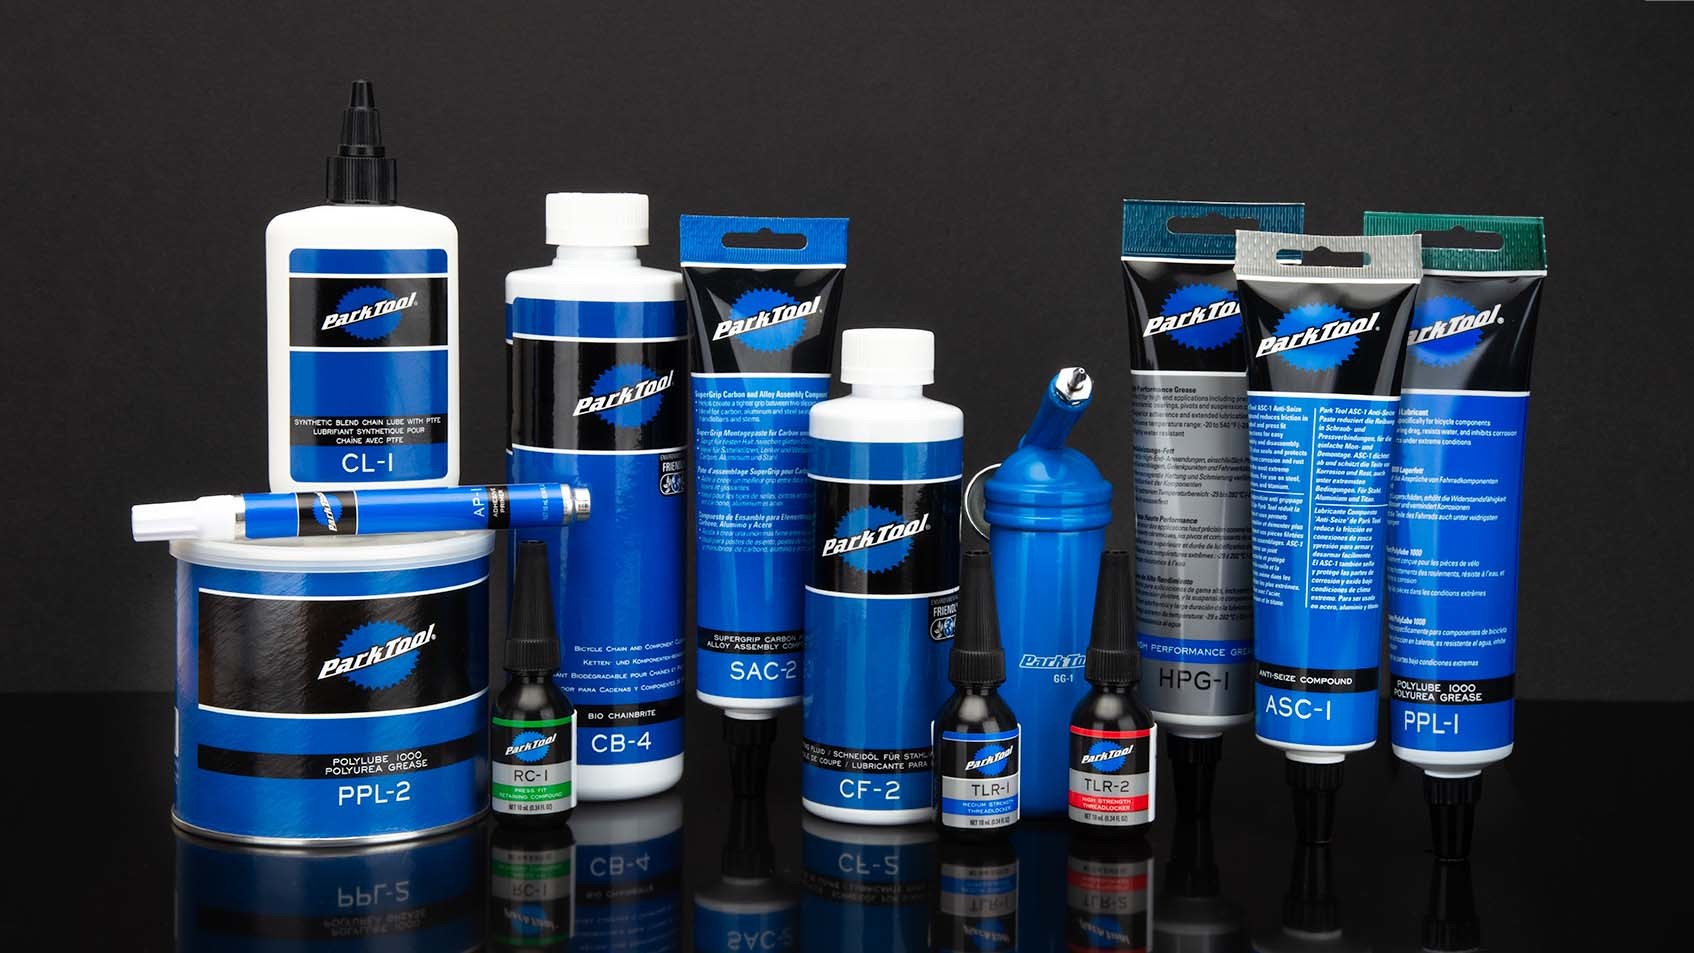 A layout of Park Tool lubricants and compounds